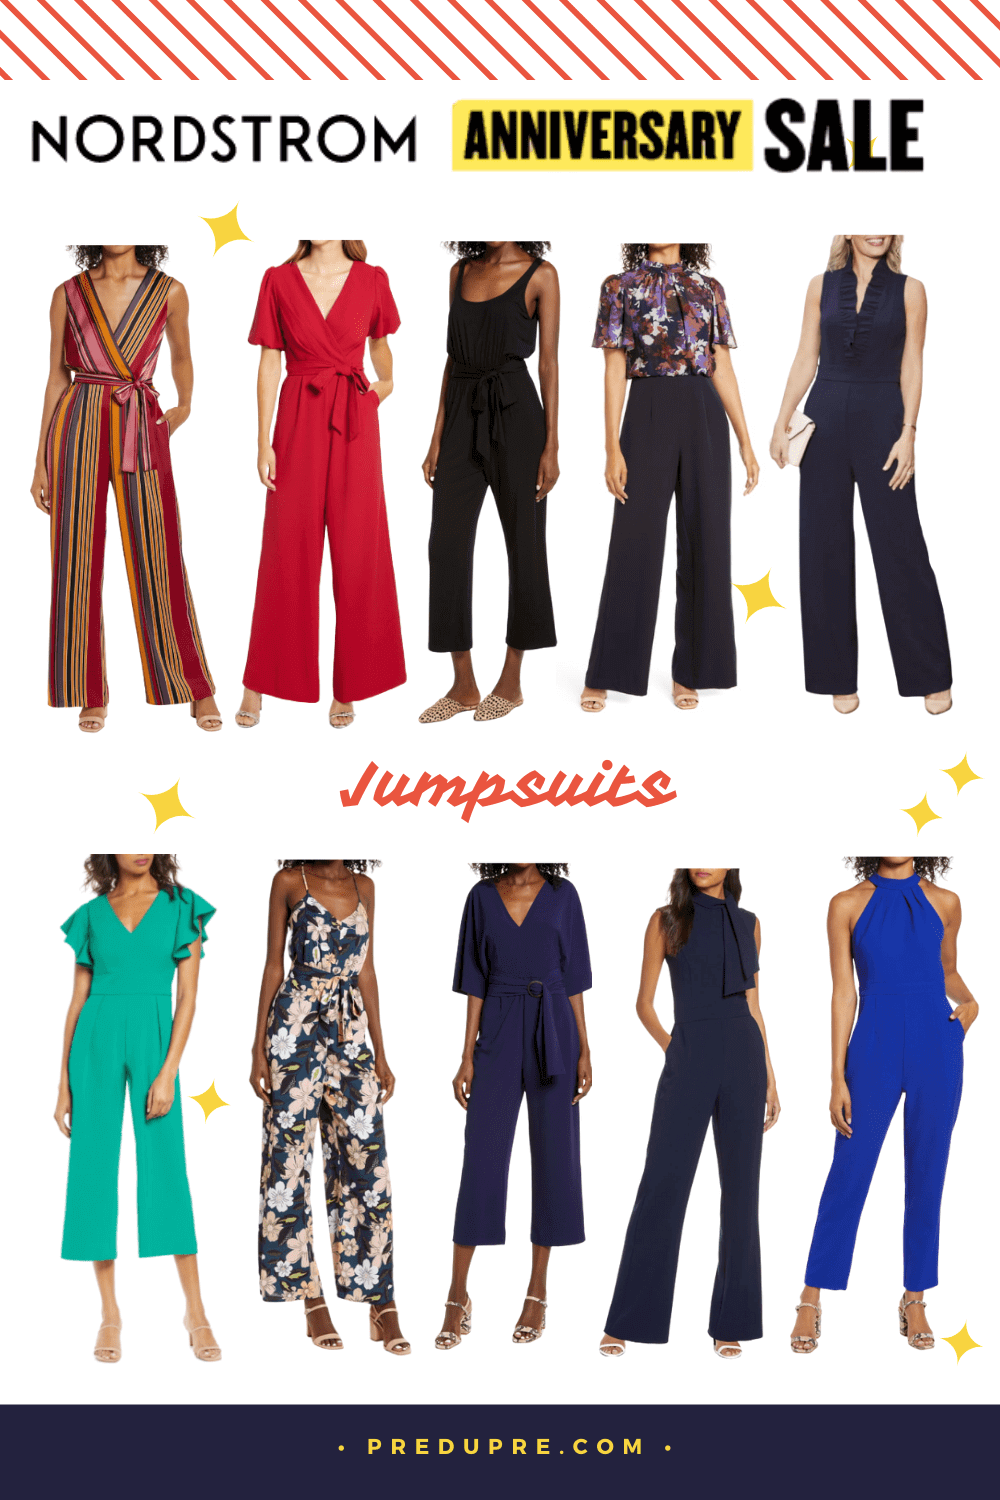 fall dresses 2020, fall dress, casual dresses, long fall dresses, women's casual midi dresses, women's dresses, maxi dresses, sweater dresses, What to wear for fall, Fall fashion inspiration, Fall fashion 2020, dressy jumpsuits, dressy rompers and jumpsuits, jumpsuits women’s, women's jumpsuits and rompers, fall jumpsuits, black jumpsuit, fall fashion outfits, fall outfits, fall outfit ideas, fall outfits 2020, fall outfit ideas 2020, fall clothes, what to wear in fall, ideas for fall fashionhow to style fall clothing, Nordstrom anniversary sale, #nsale, Nordstrom anniversary sale 2020, 